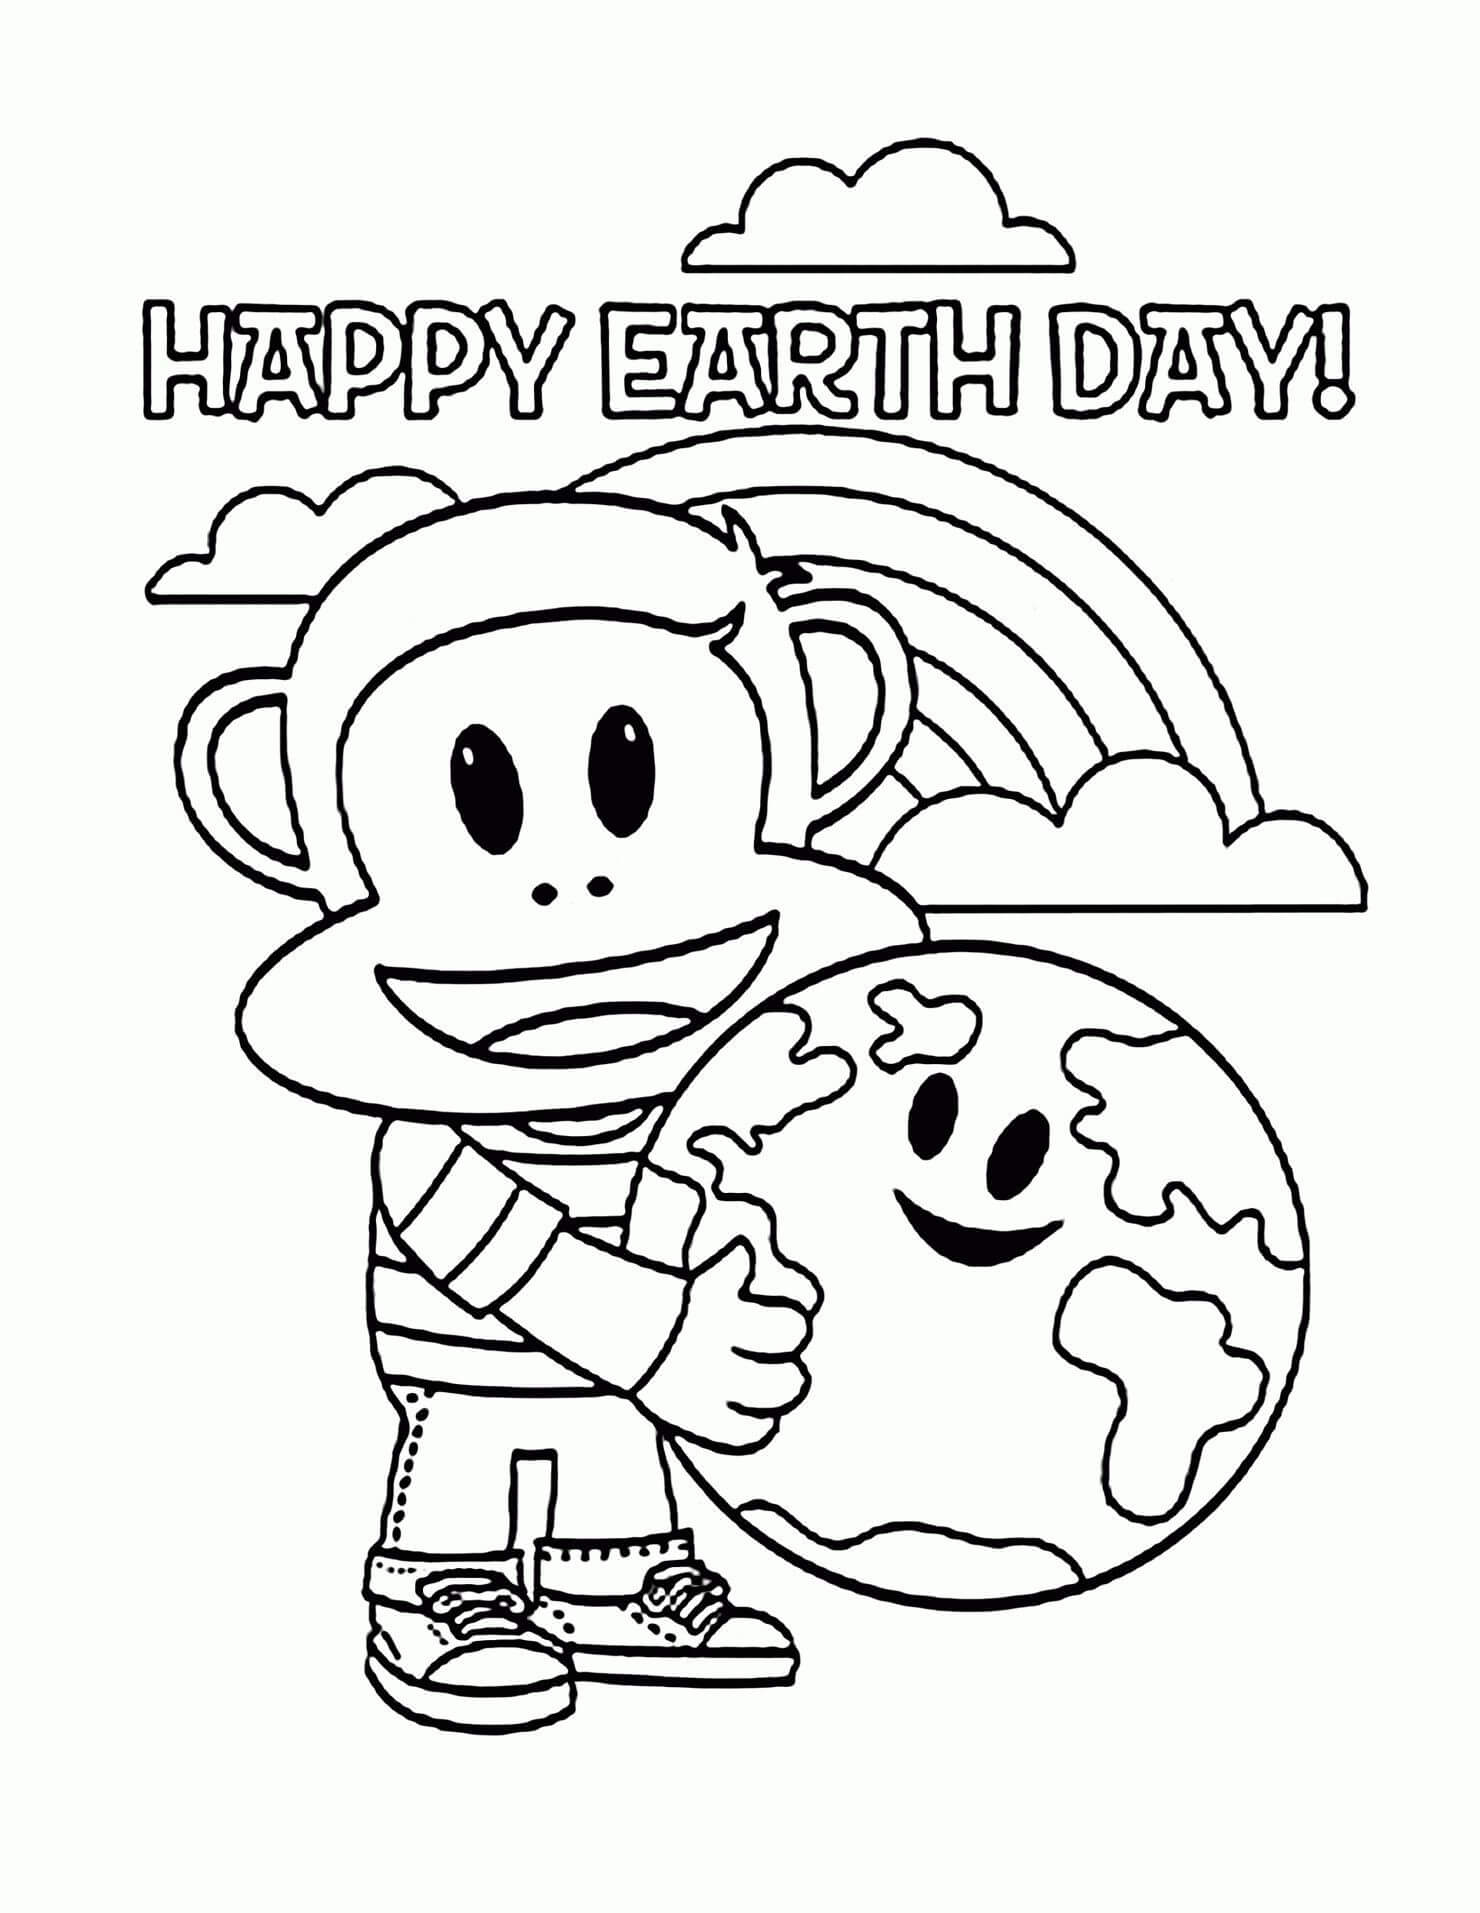 earth-day-printable-coloring-pages